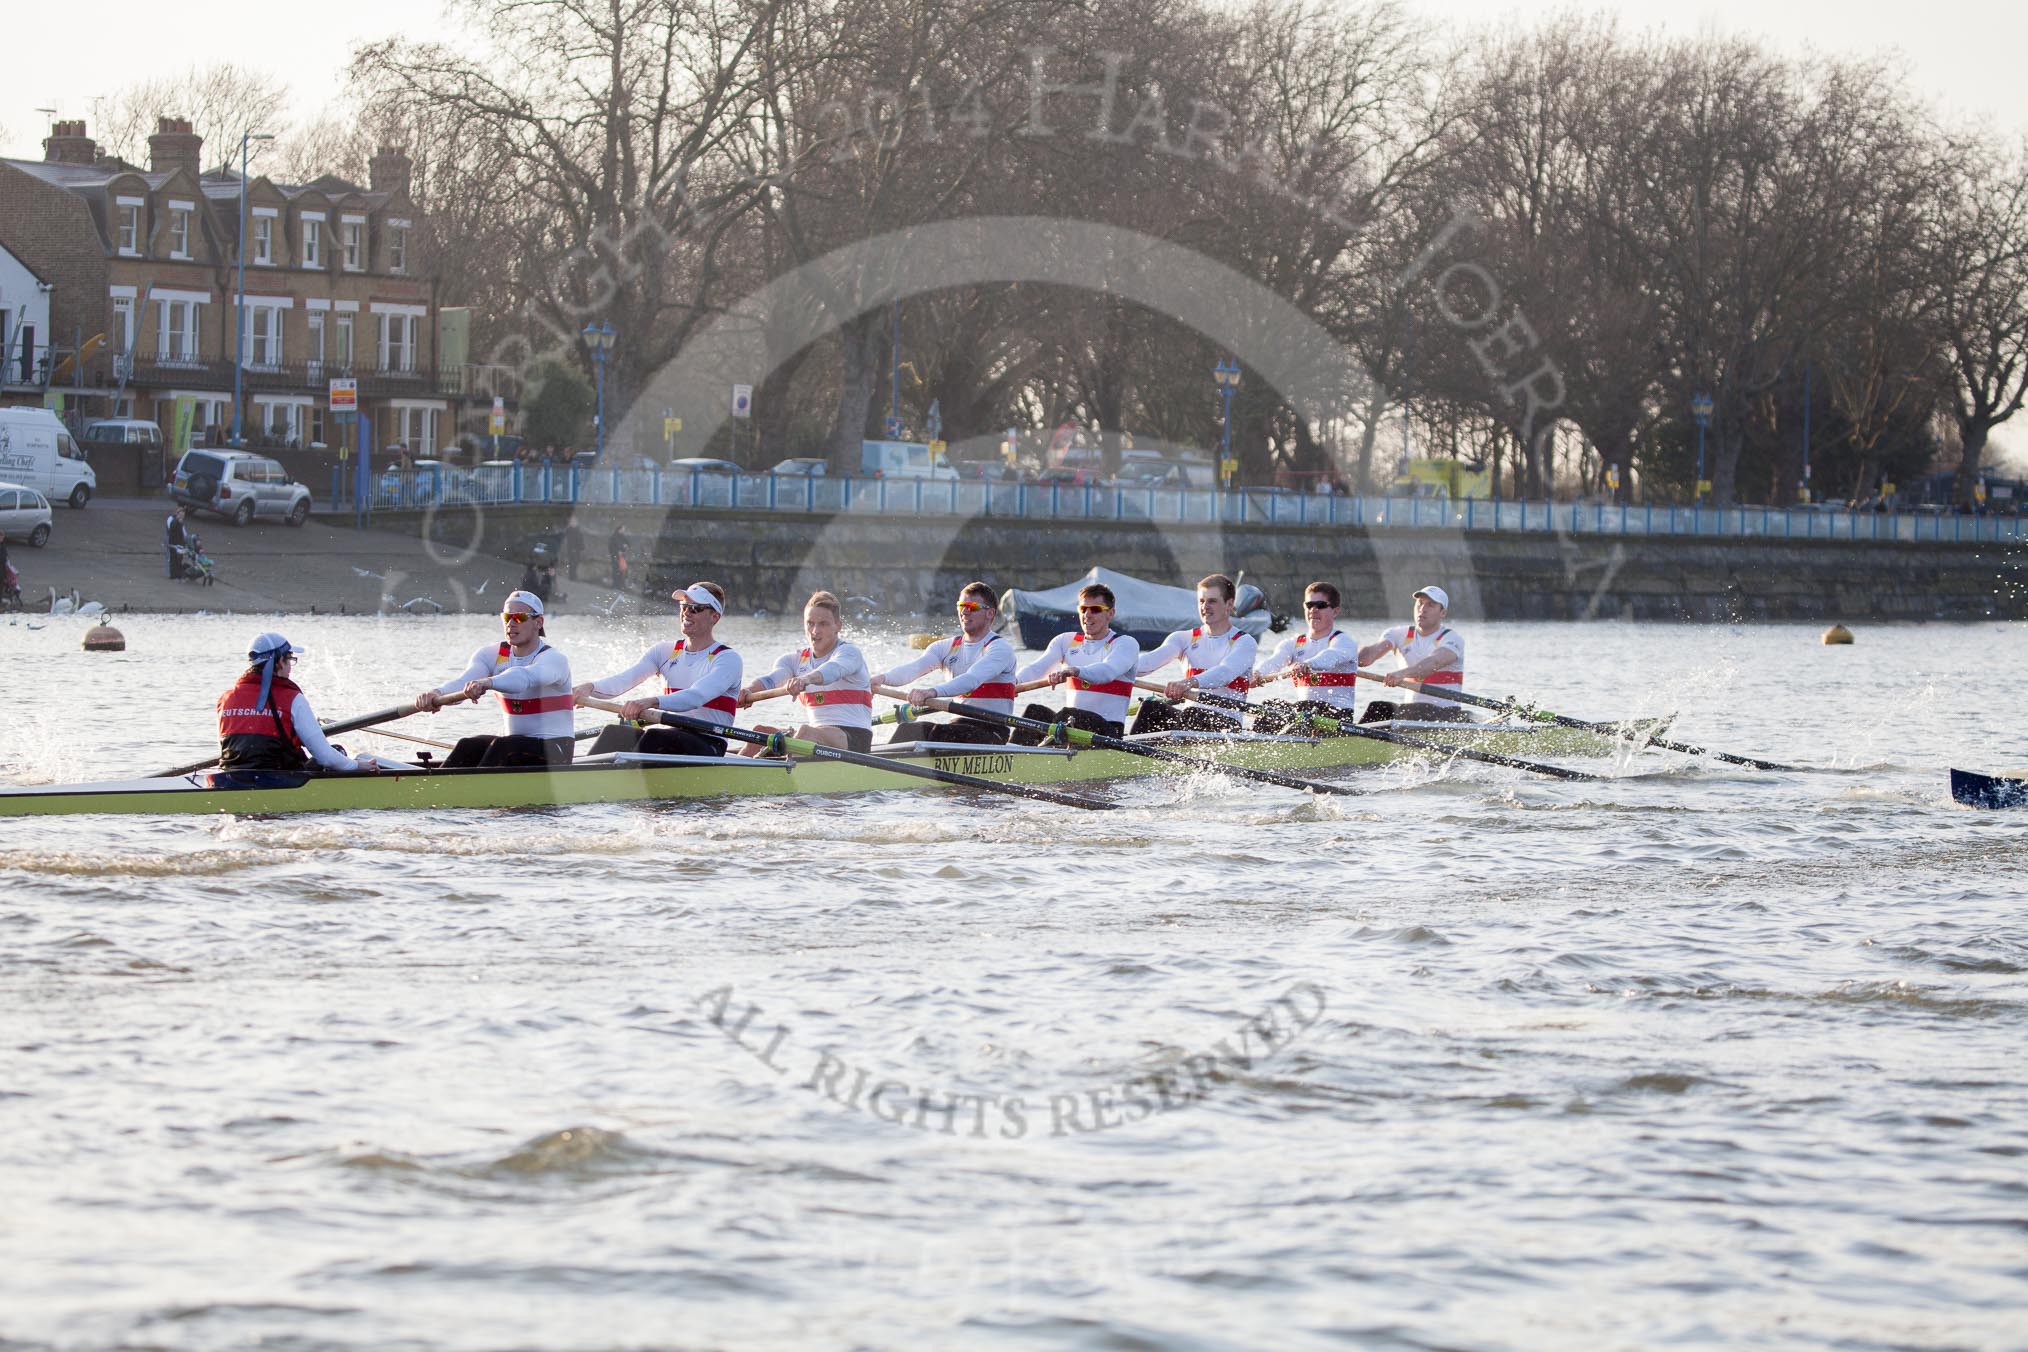 The Boat Race season 2014 - fixture OUBC vs German U23: The German U23-boat at the Putney boat houses..
River Thames between Putney Bridge and Chiswick Bridge,



on 08 March 2014 at 16:47, image #58